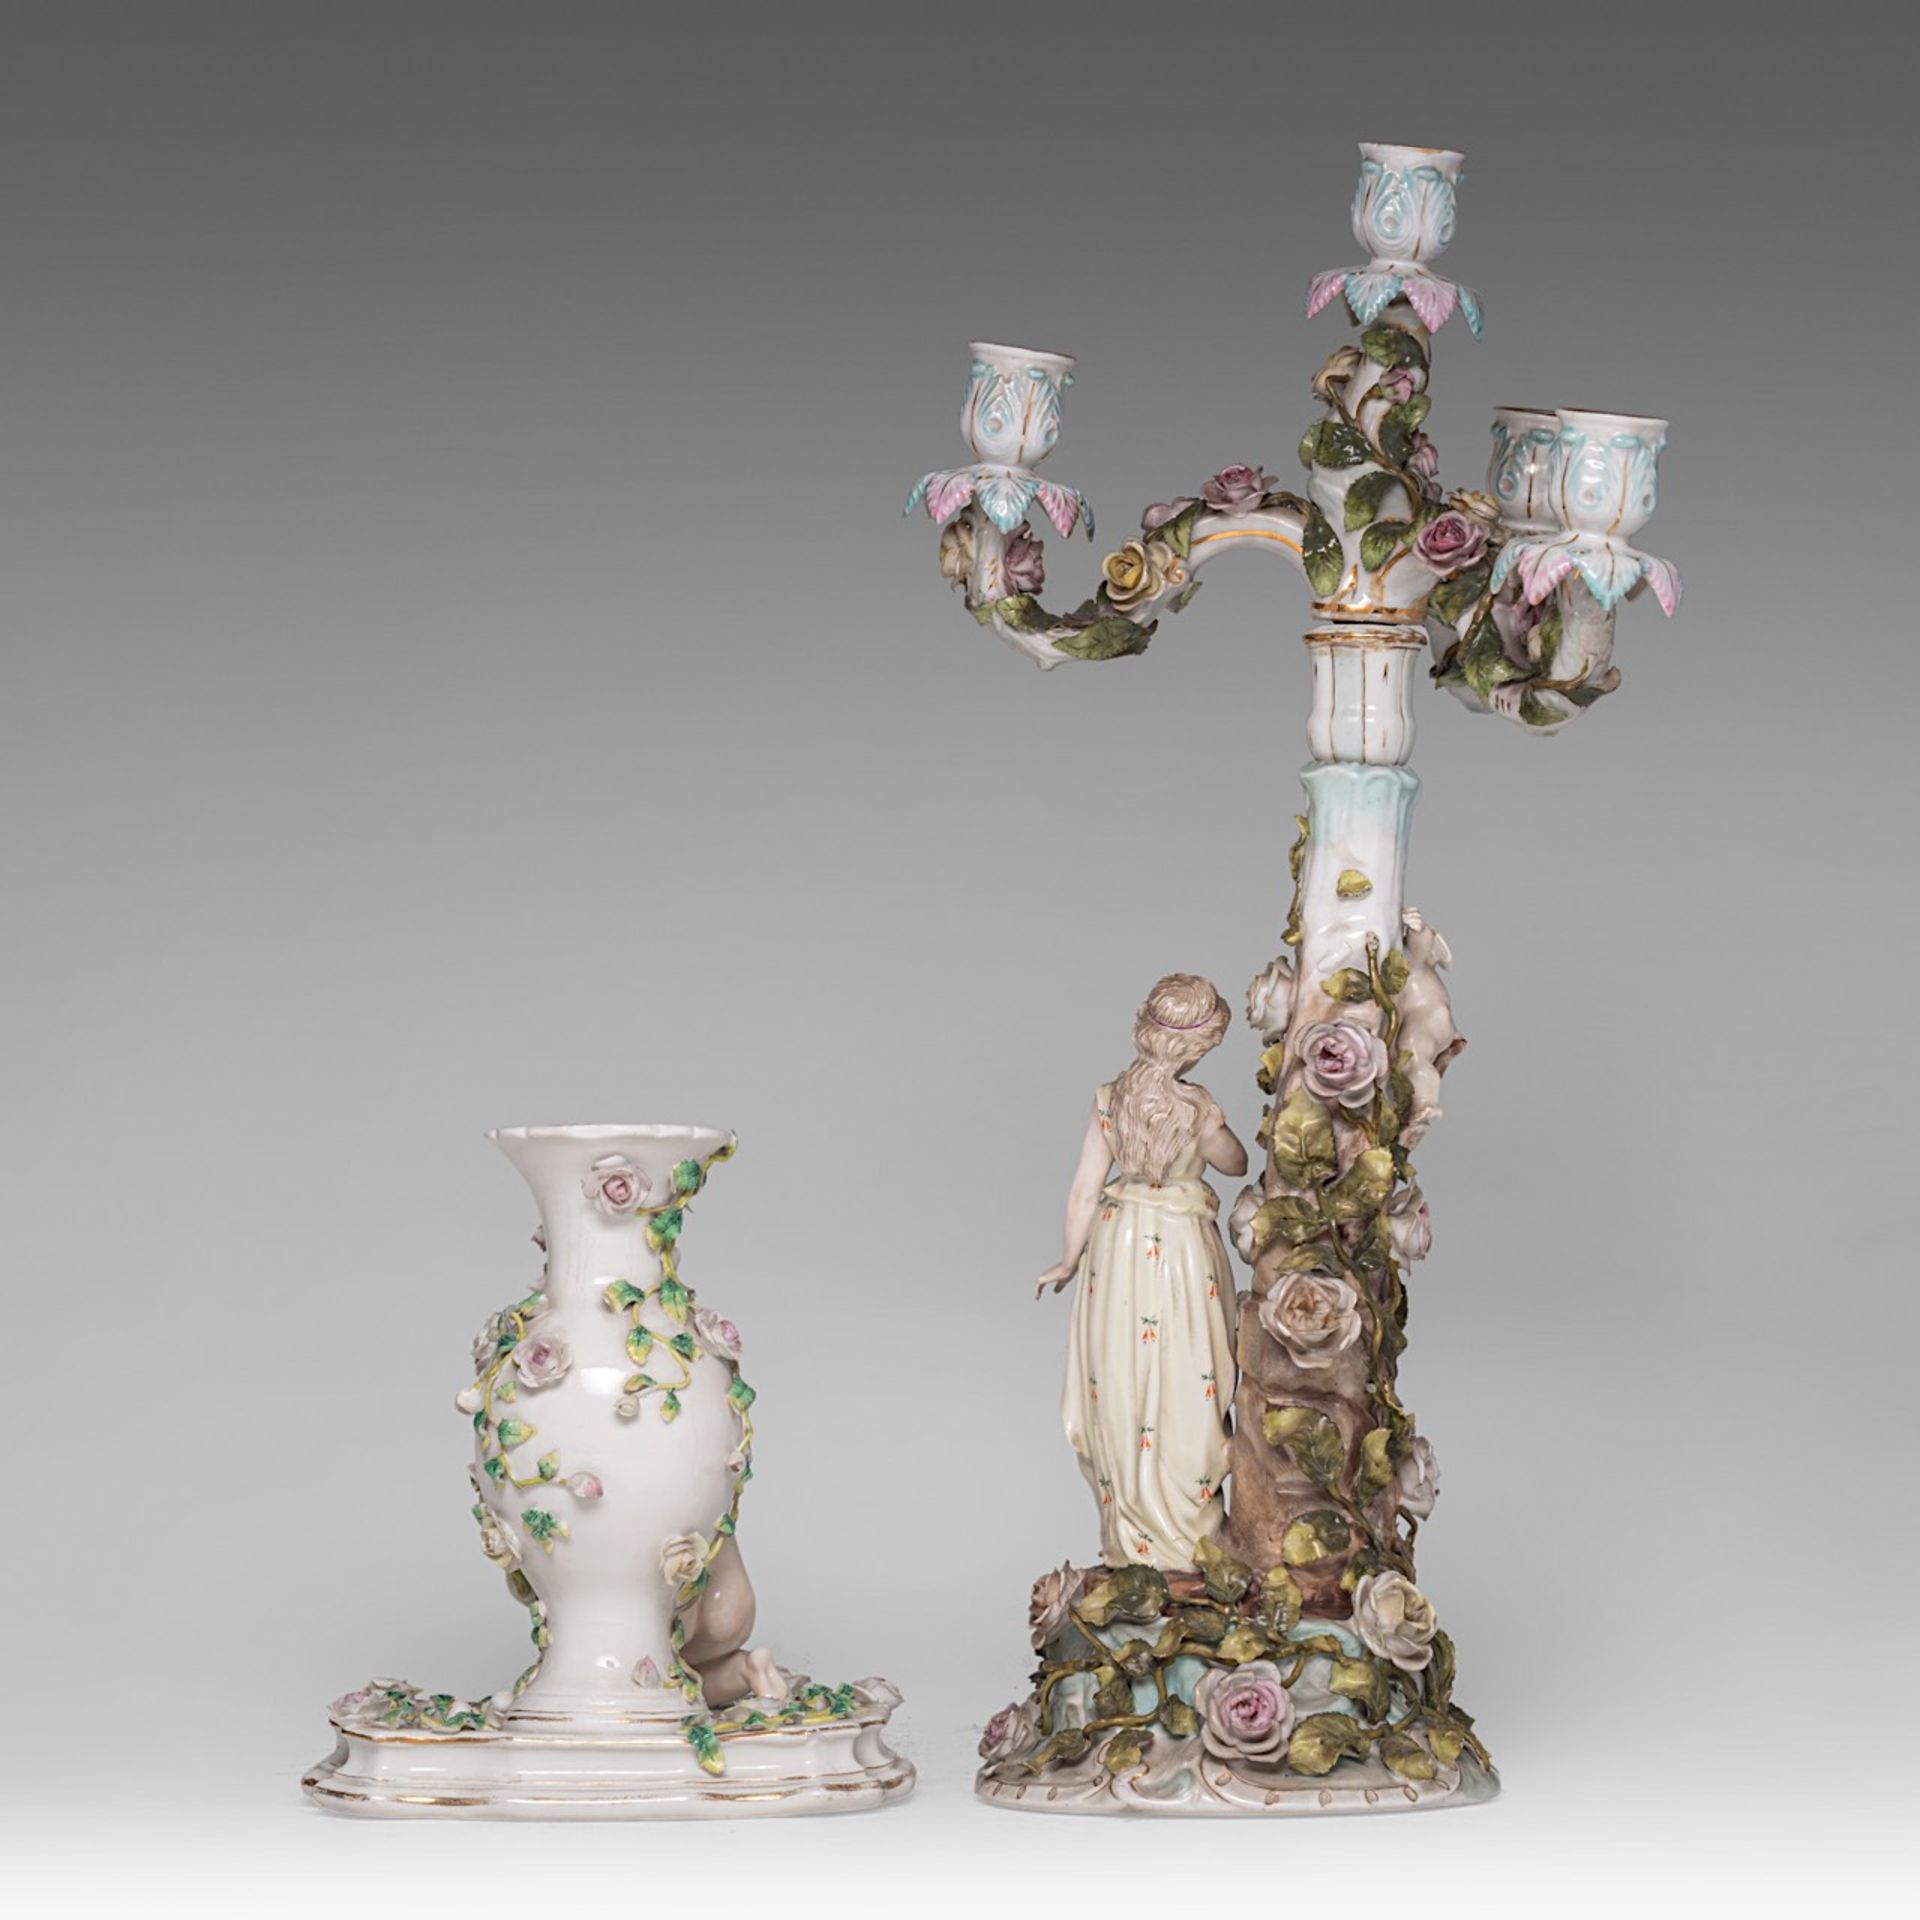 A collection of polychrome decorated Saxon porcelain figurines and a candelabra, H 51,5 cm (tallest) - Image 4 of 13